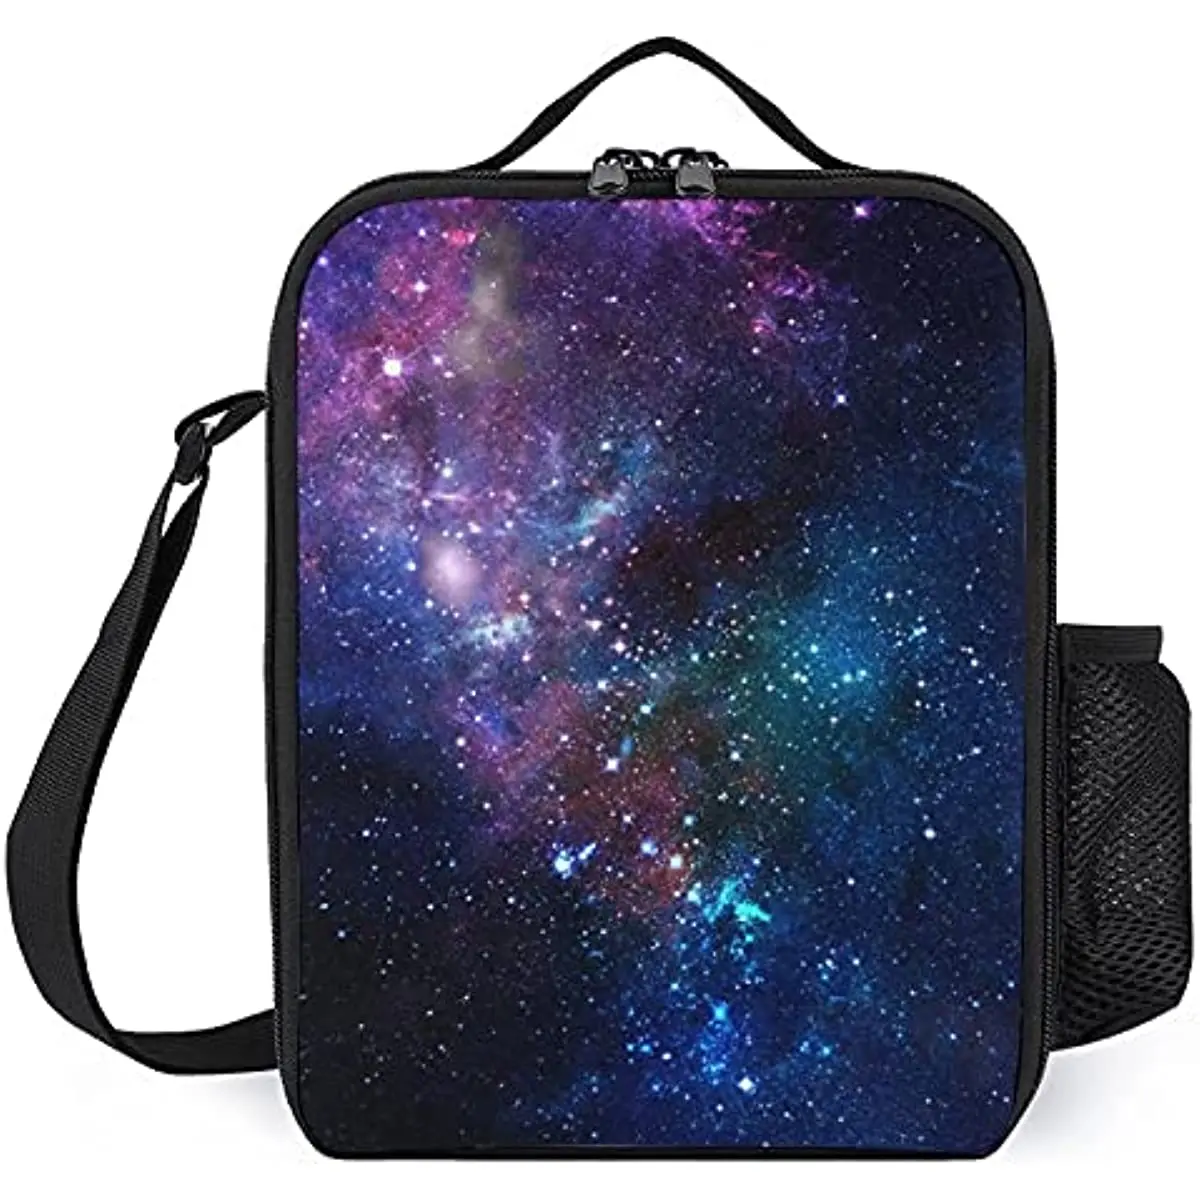 Galaxy Lunch Box for Girls Boy Leakproof Portable Lunch Bags with Adjustable Shoulder Strap and Side Pocket Durable Reusable